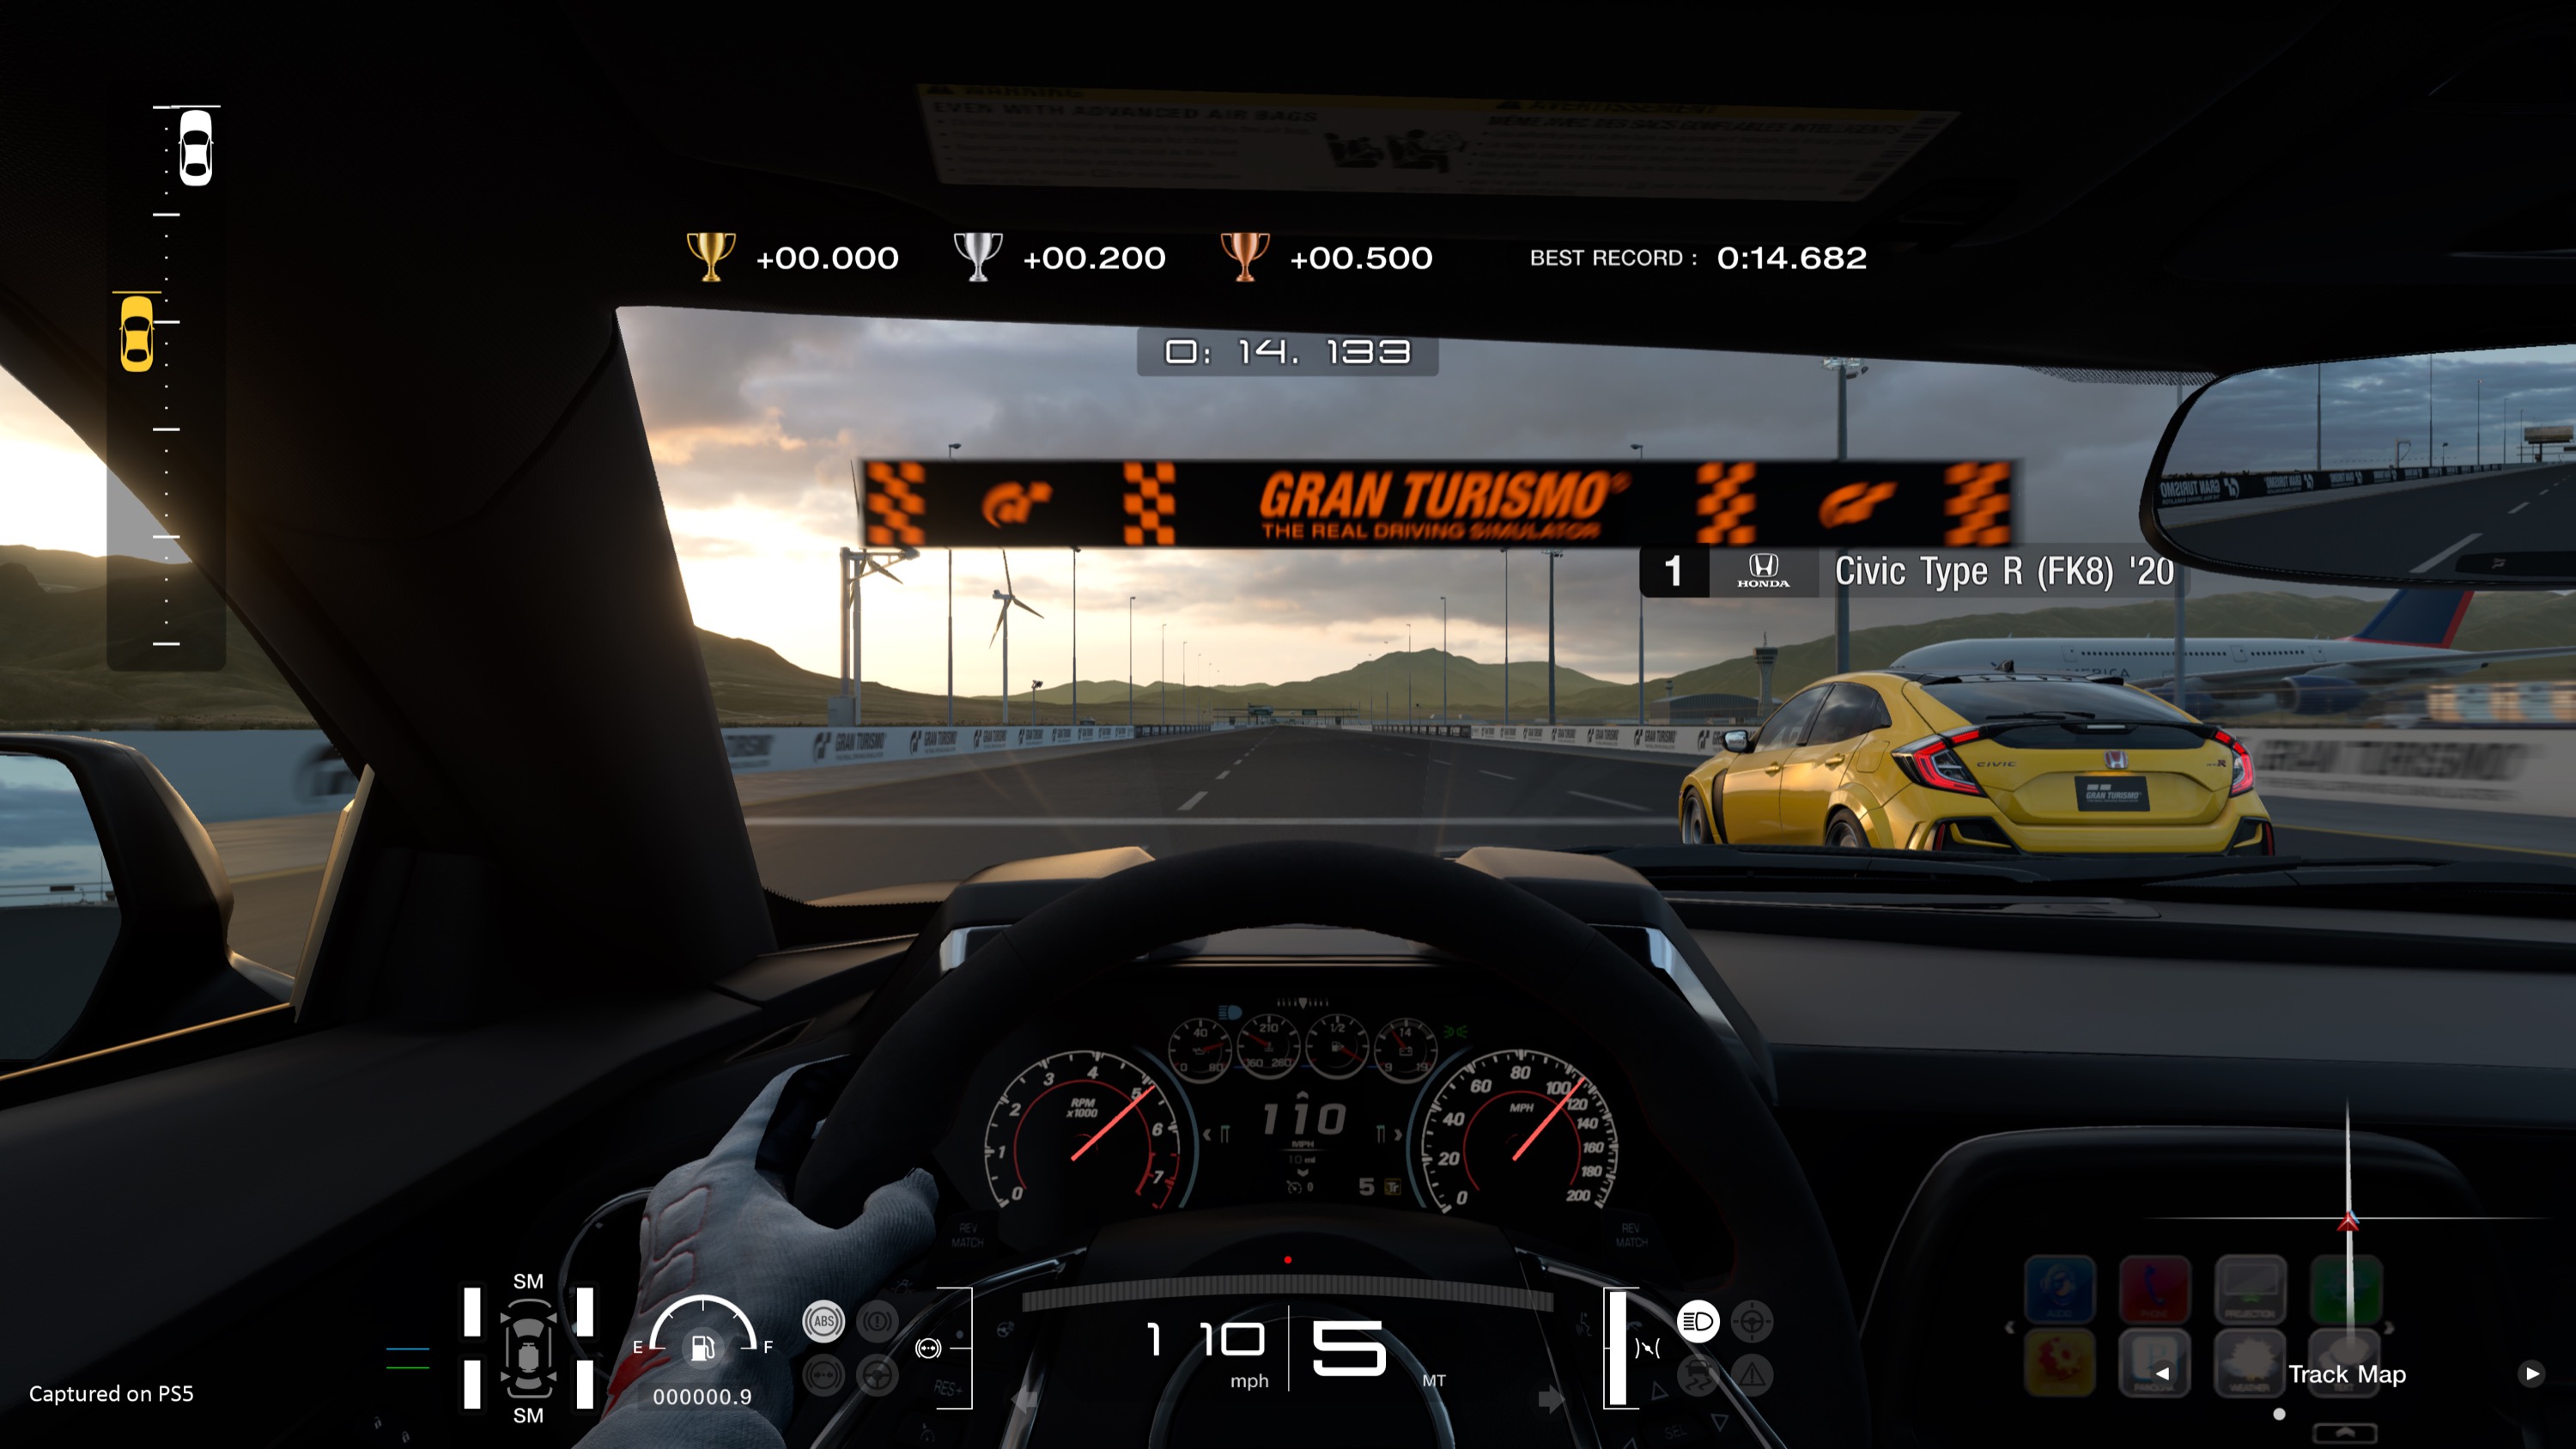 Jeg accepterer det offer Koncession Gran Turismo 7 preview: A return to expansive, grindy, car-collecting roots  | Ars Technica